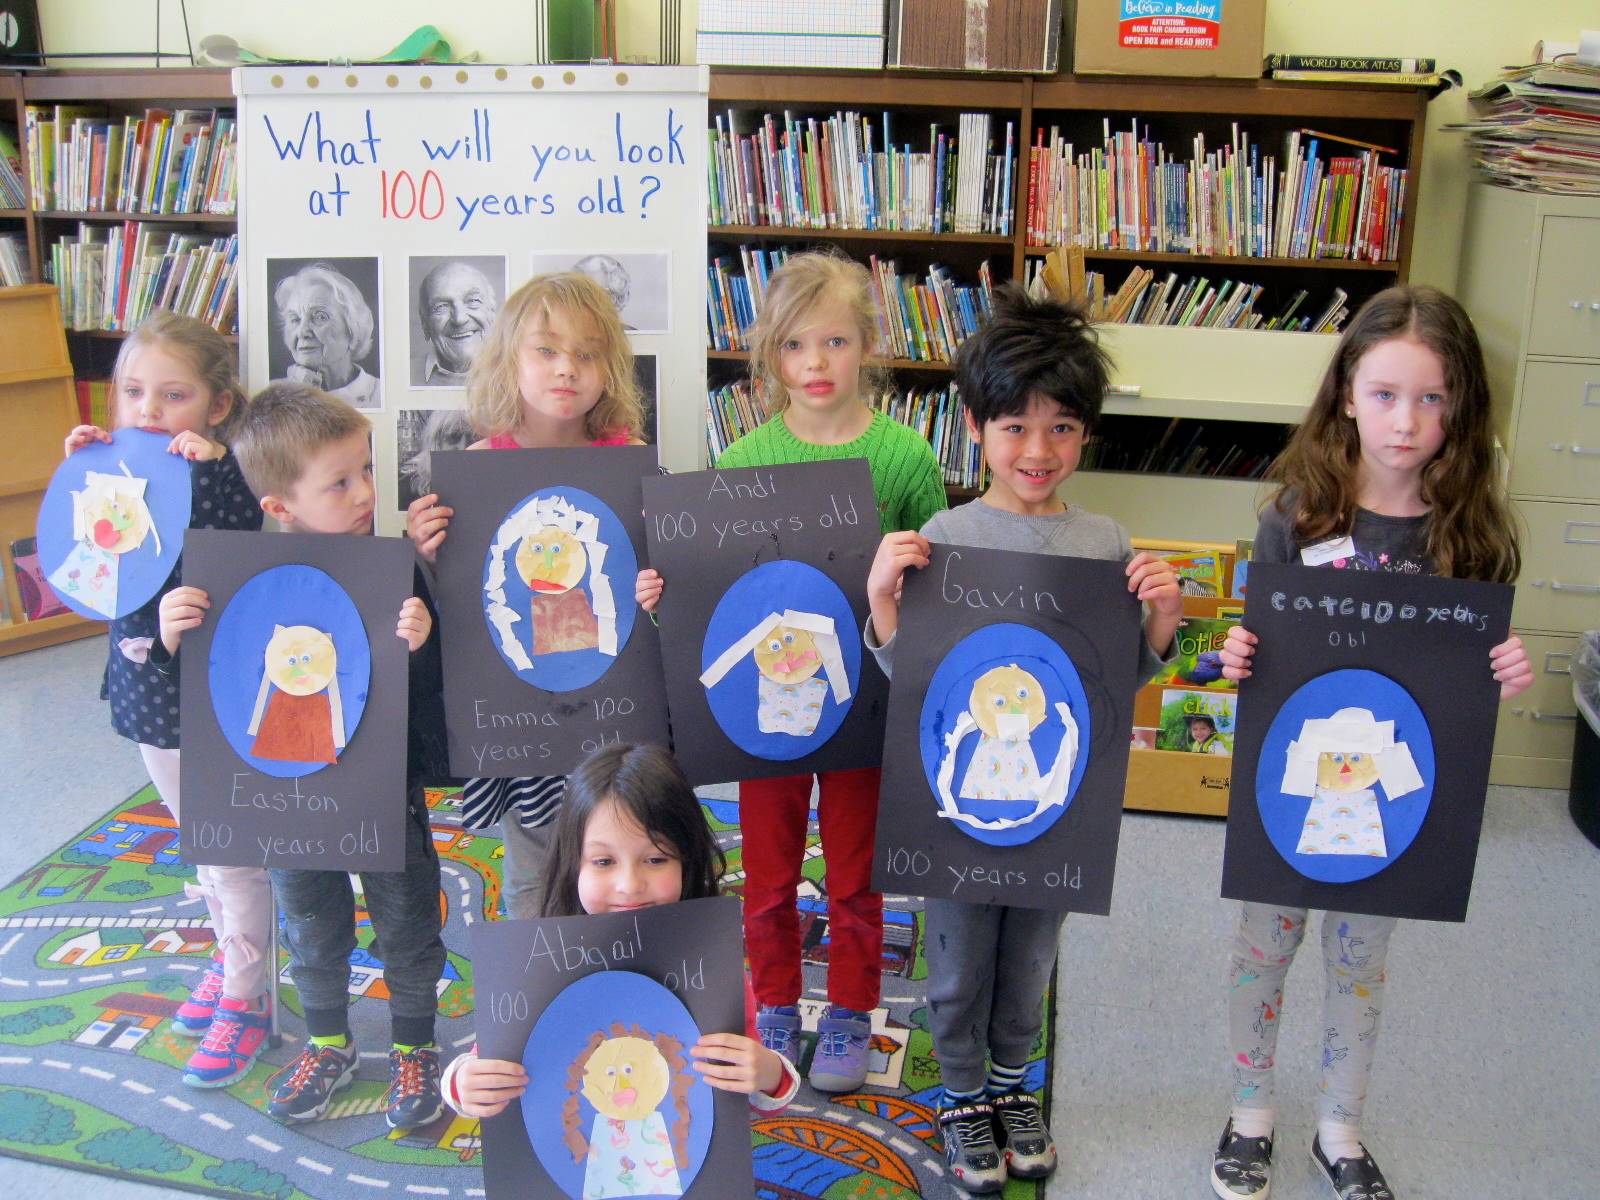 7 students with their 100 year old portraits!